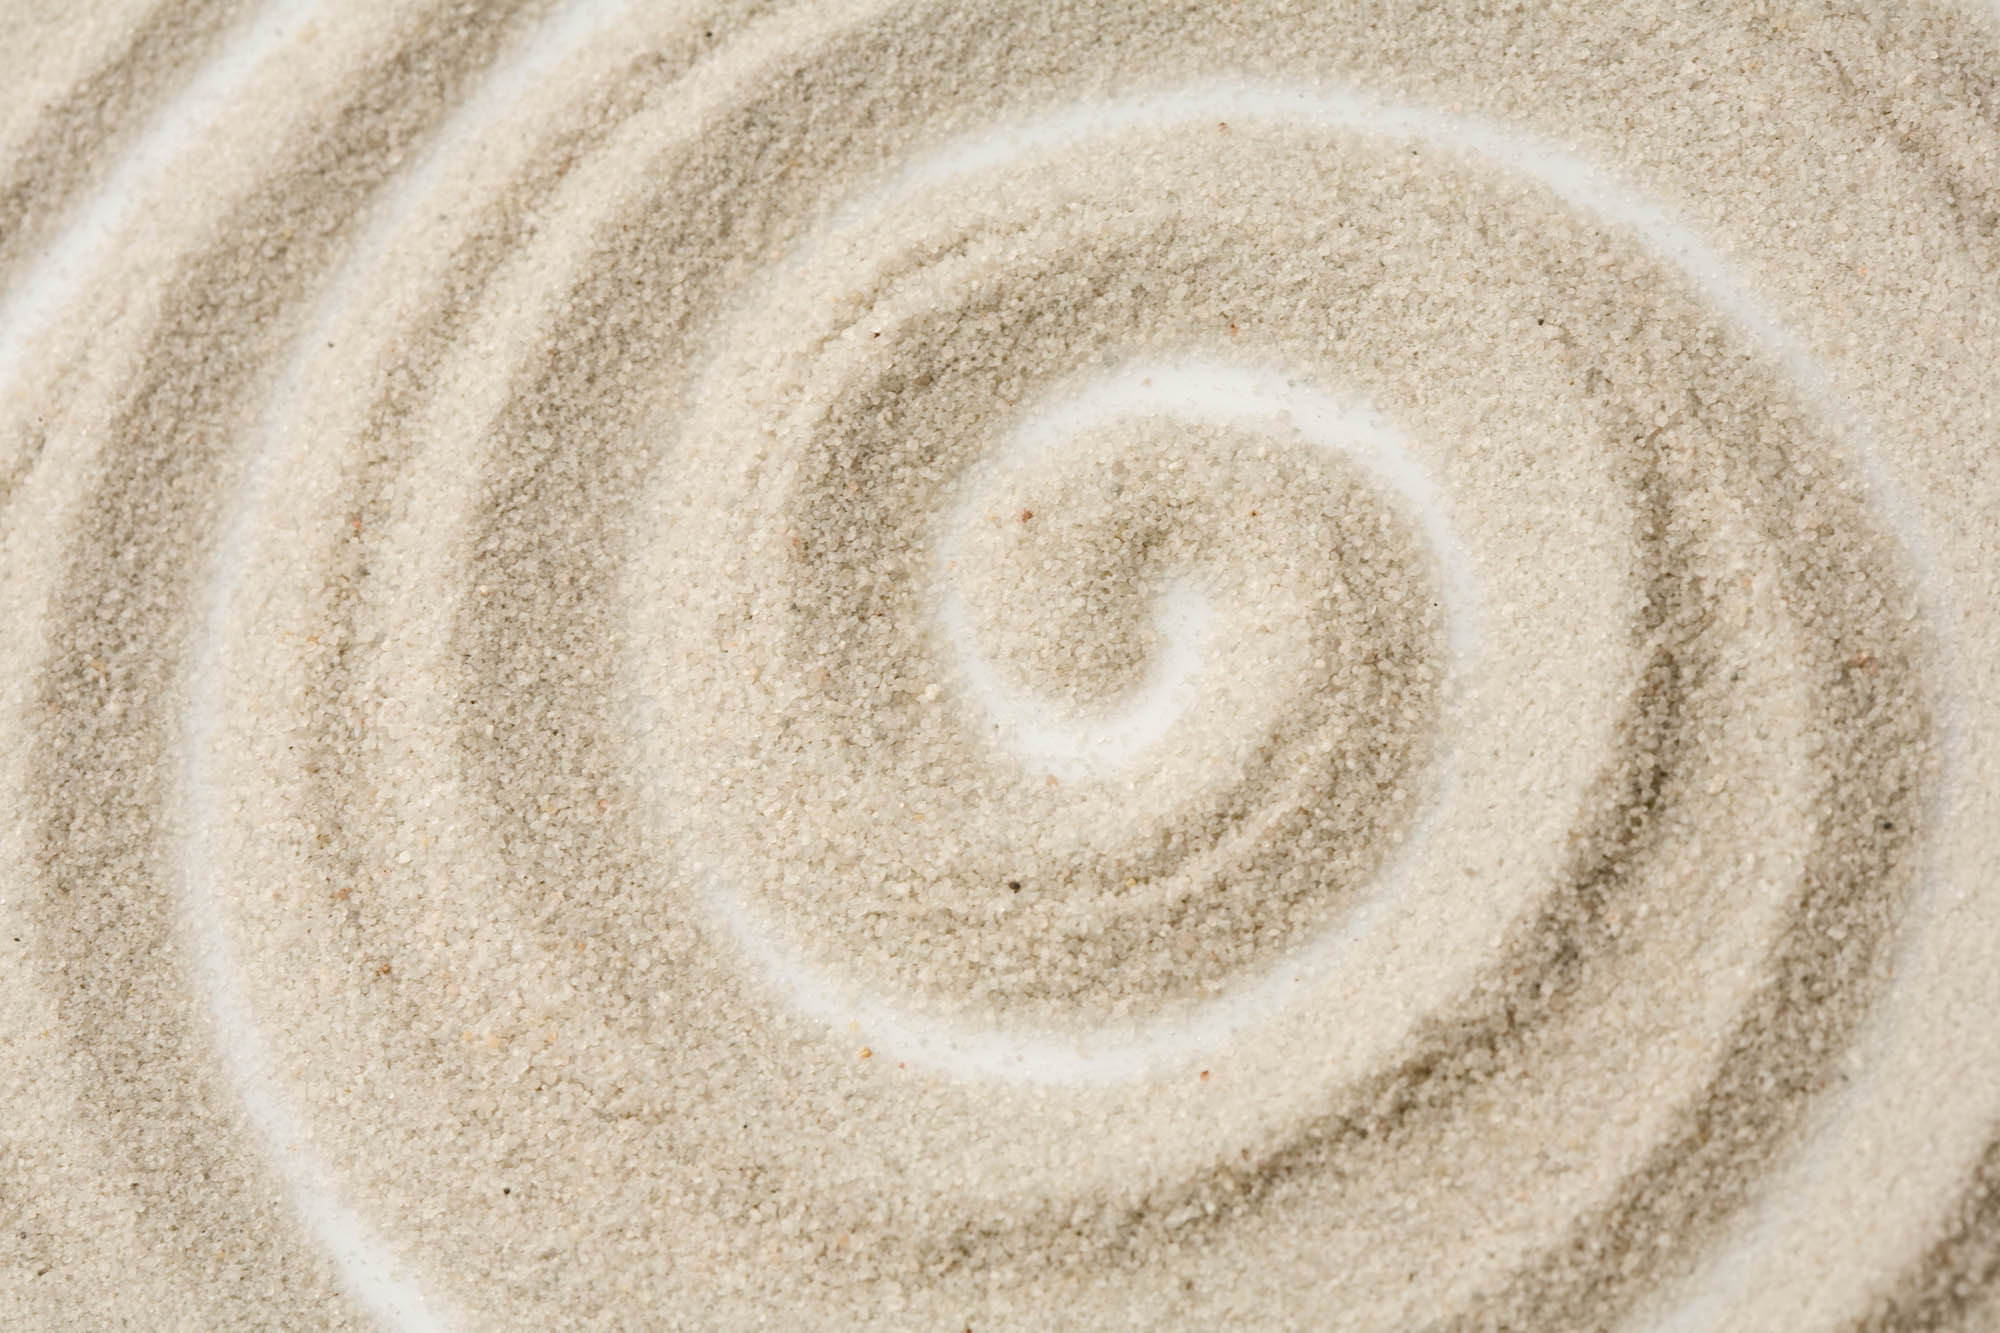 Photo of spiral pattern in the sand